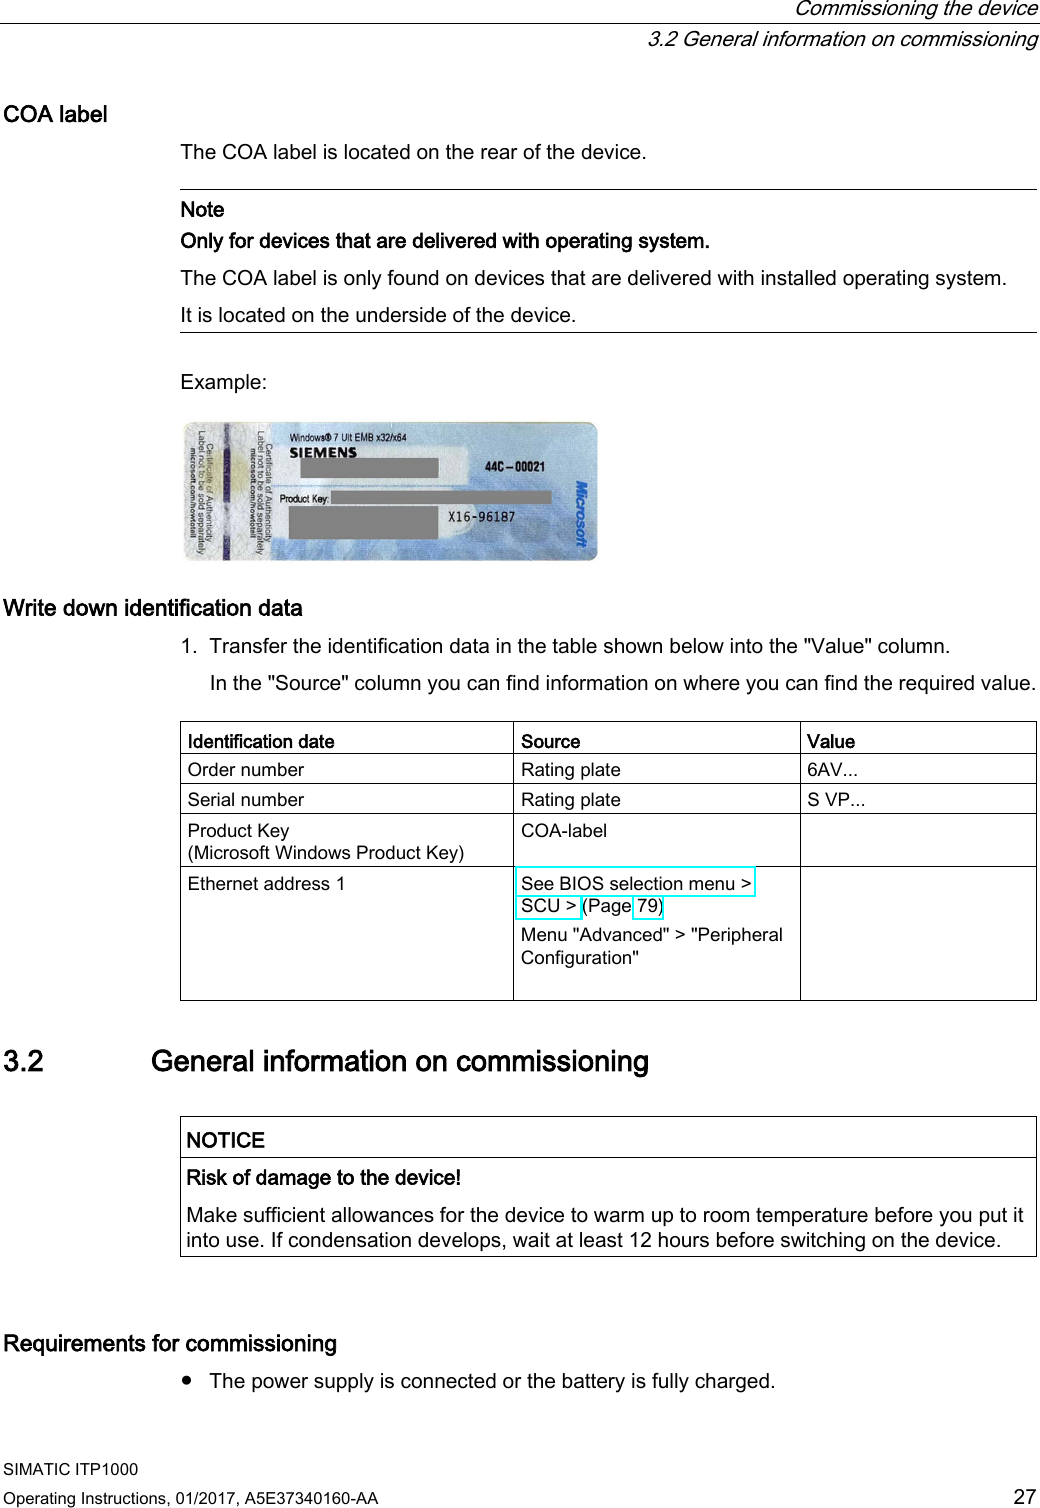  Commissioning the device  3.2 General information on commissioning SIMATIC ITP1000 Operating Instructions, 01/2017, A5E37340160-AA  27 COA label The COA label is located on the rear of the device.   Note Only for devices that are delivered with operating system. The COA label is only found on devices that are delivered with installed operating system. It is located on the underside of the device.  Example:  Write down identification data 1. Transfer the identification data in the table shown below into the &quot;Value&quot; column. In the &quot;Source&quot; column you can find information on where you can find the required value.  Identification date Source Value Order number Rating plate  6AV... Serial number  Rating plate S VP... Product Key (Microsoft Windows Product Key) COA-label    Ethernet address 1 See BIOS selection menu &gt; SCU &gt; (Page 79) Menu &quot;Advanced&quot; &gt; &quot;Peripheral Configuration&quot;    3.2 General information on commissioning   NOTICE Risk of damage to the device! Make sufficient allowances for the device to warm up to room temperature before you put it into use. If condensation develops, wait at least 12 hours before switching on the device.  Requirements for commissioning ● The power supply is connected or the battery is fully charged. 